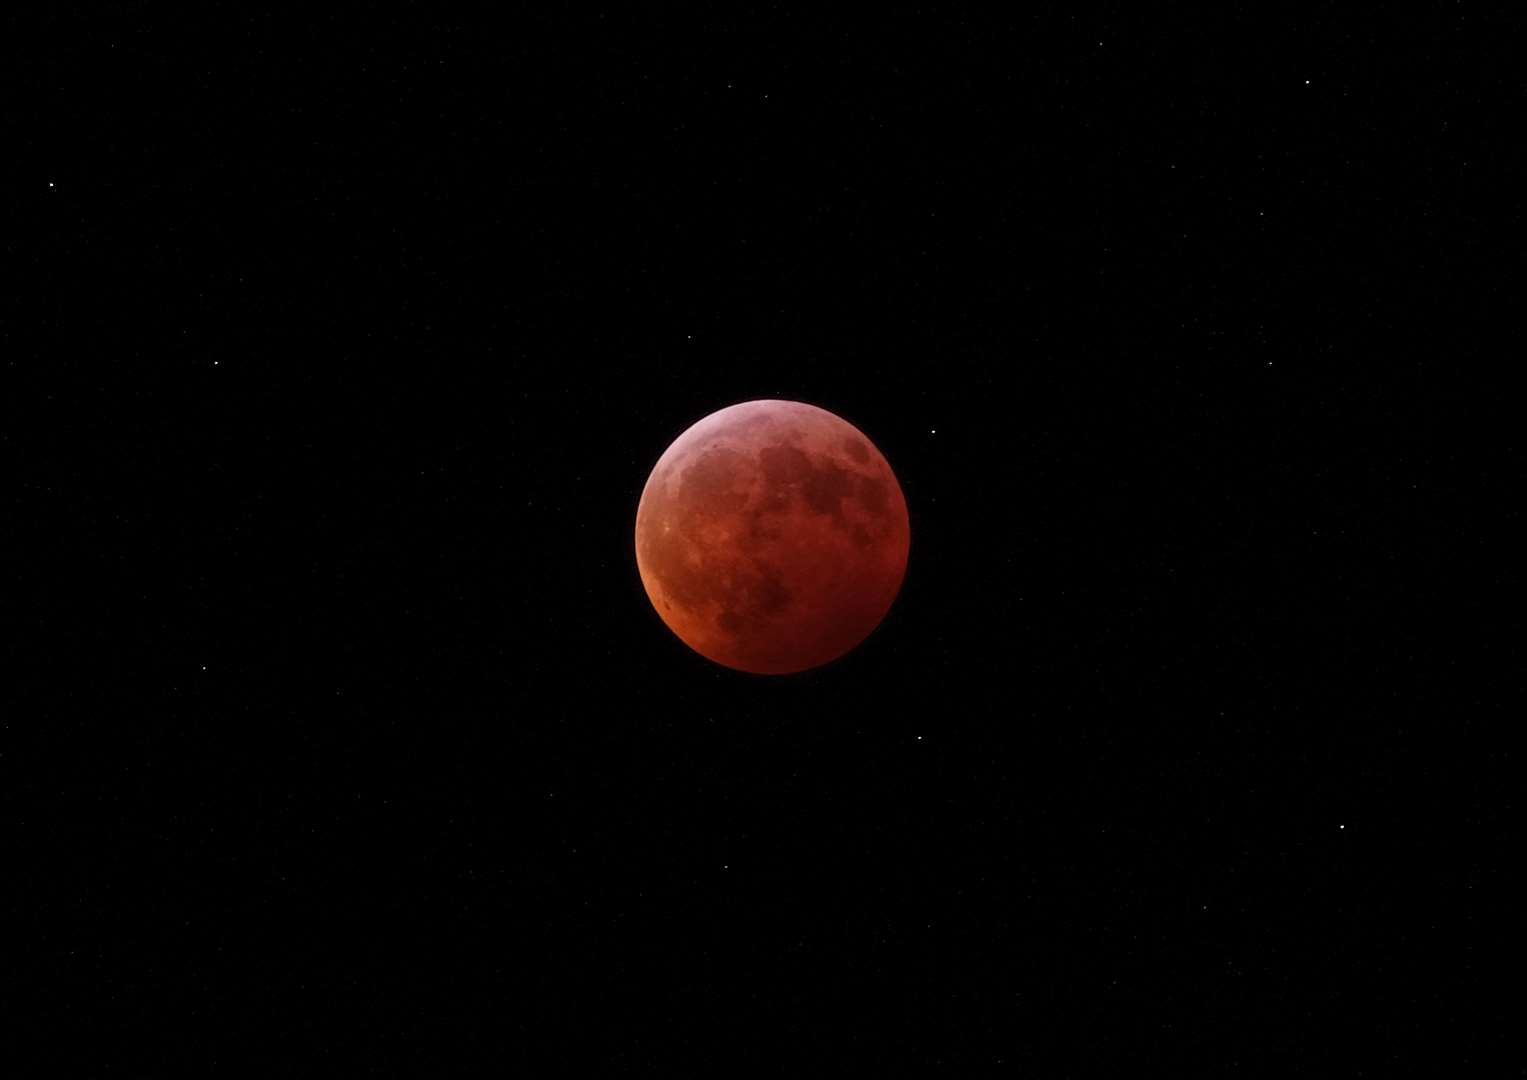 The full lunar eclipse in January